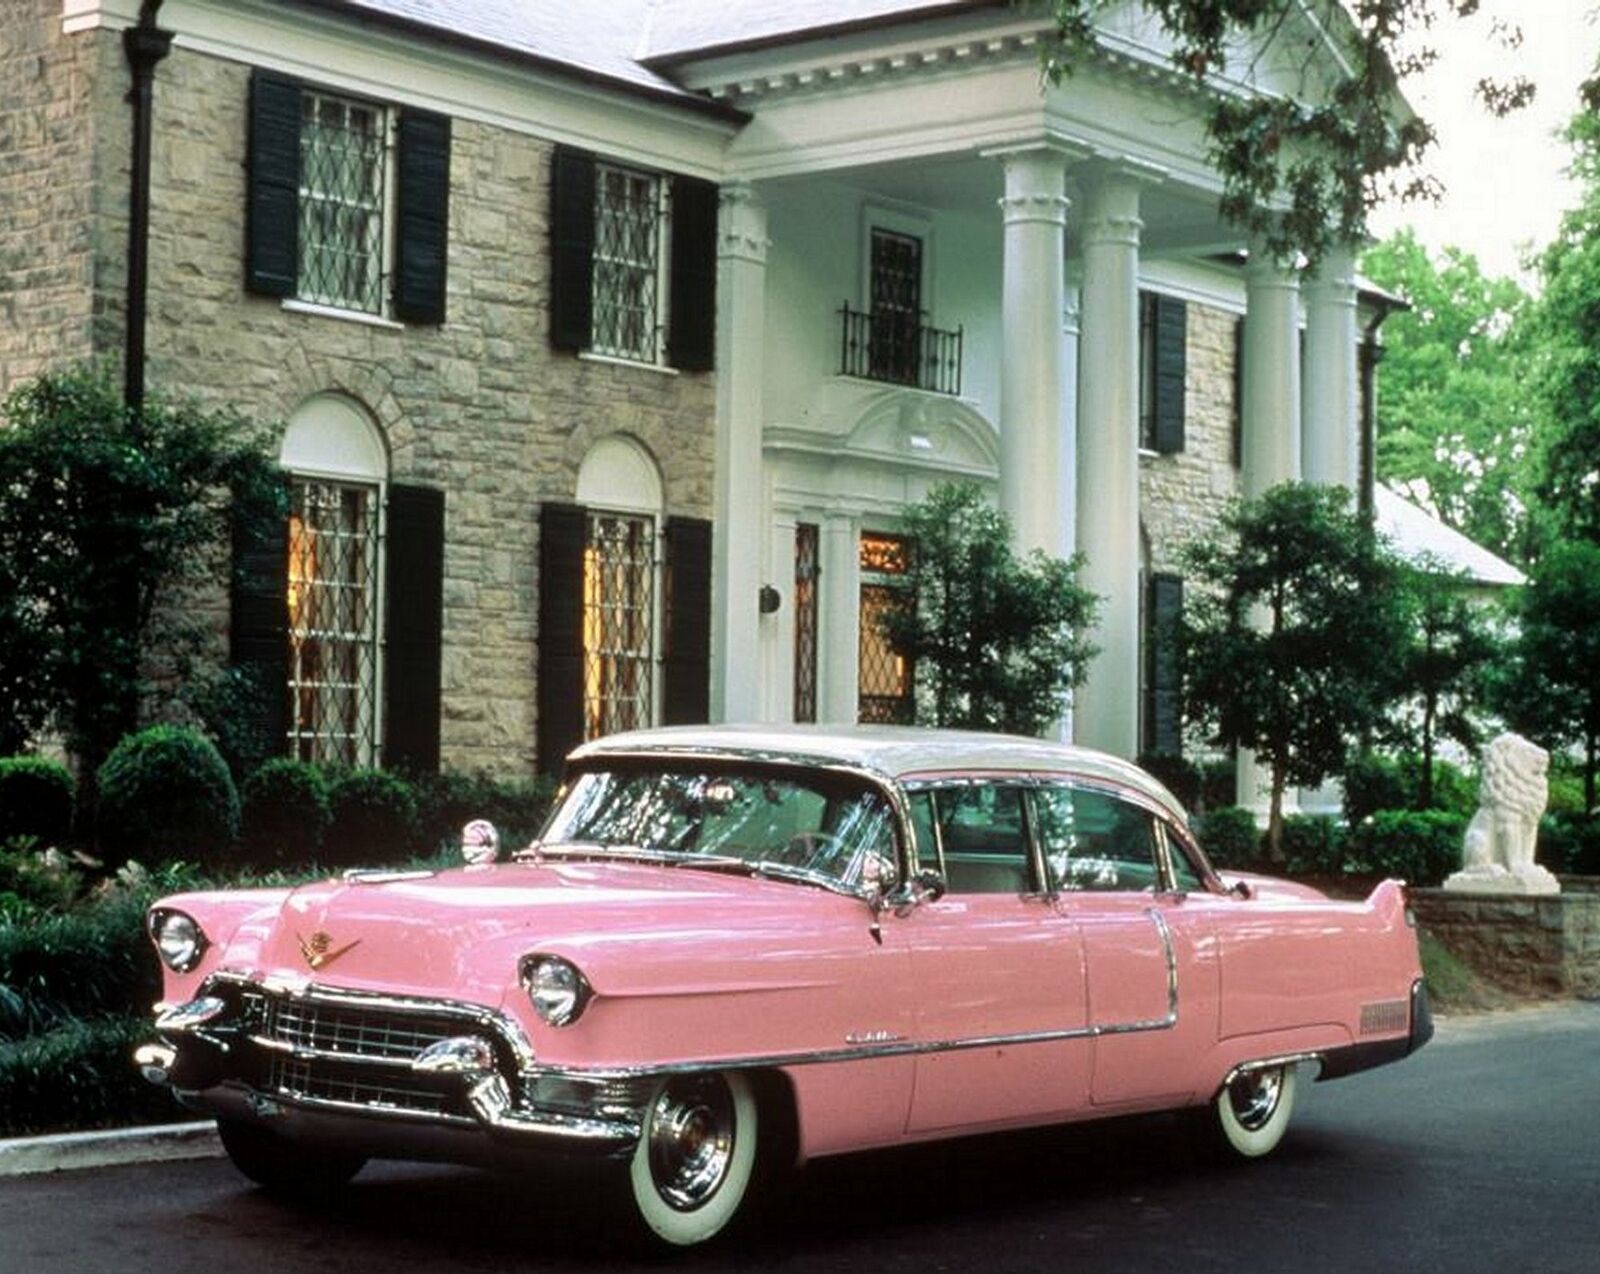 ELVIS PRESLEY'S Pink Cadillac in Front of GRACELAND Photo (206-A)